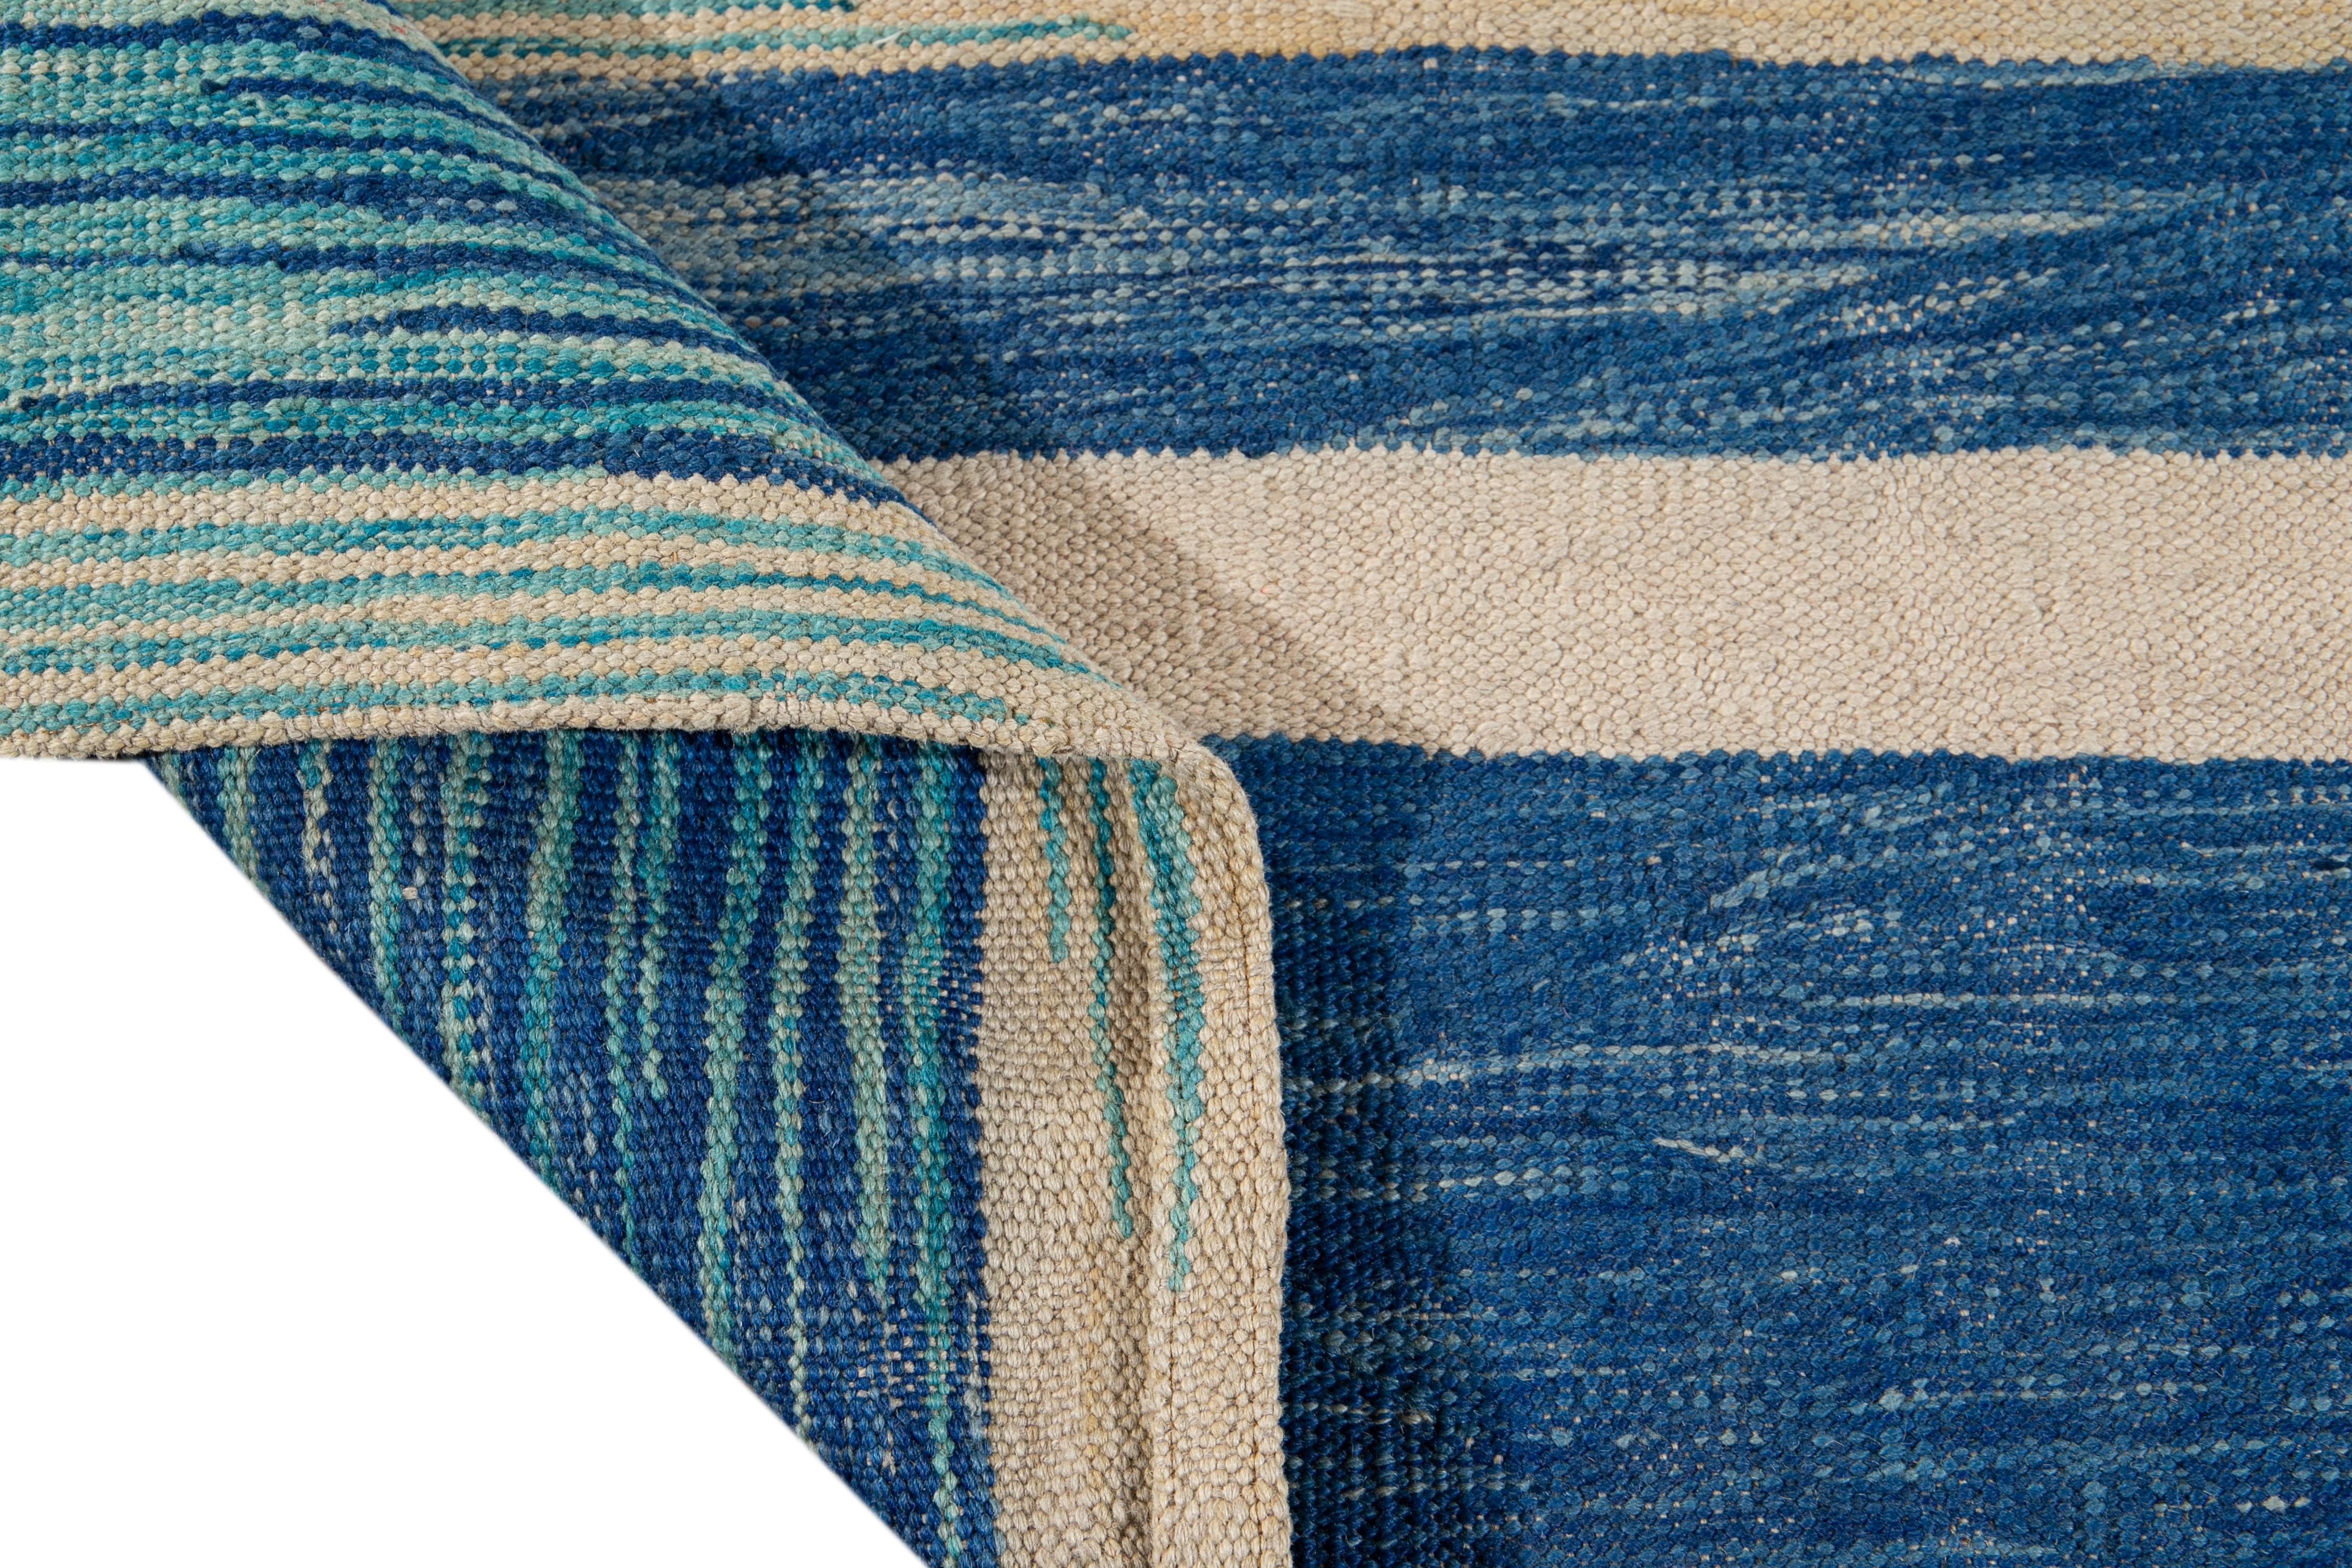 Beautiful modern flat-weave Kilim handmade wool rug with a beige field. This Kilim rug has accents of teal and blue in a gorgeous geometric expressionist design.

This rug measures: 8'10